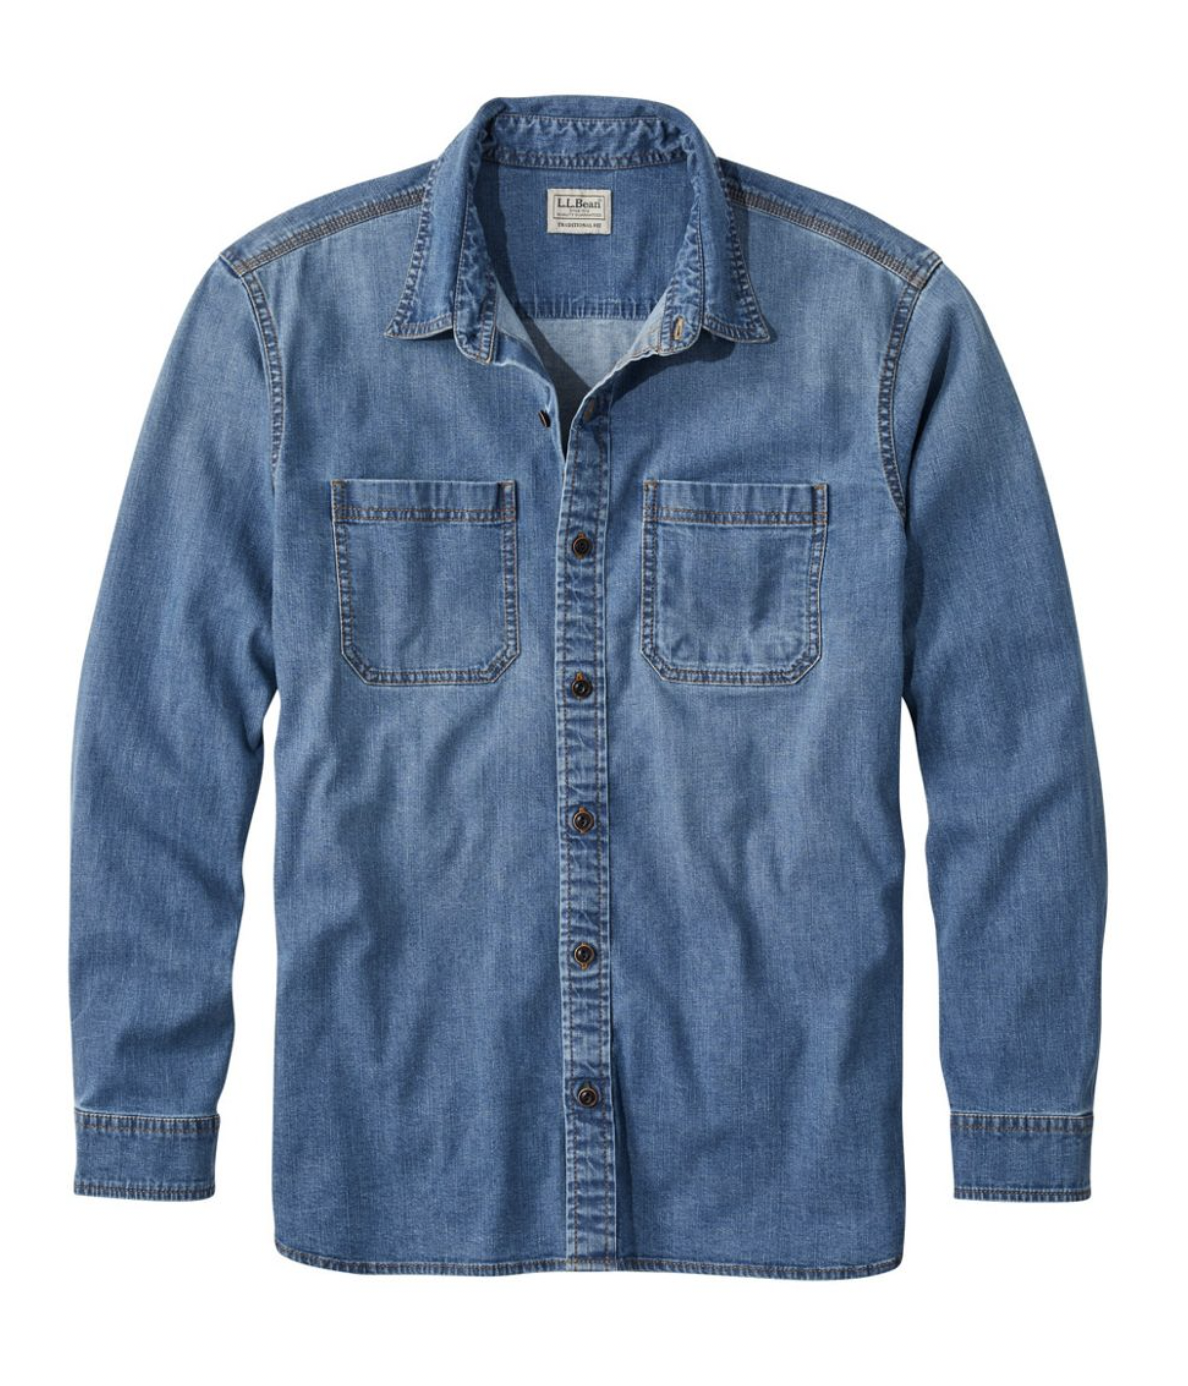 Men's Double Denim Club Outfit with Black Faded Jeans